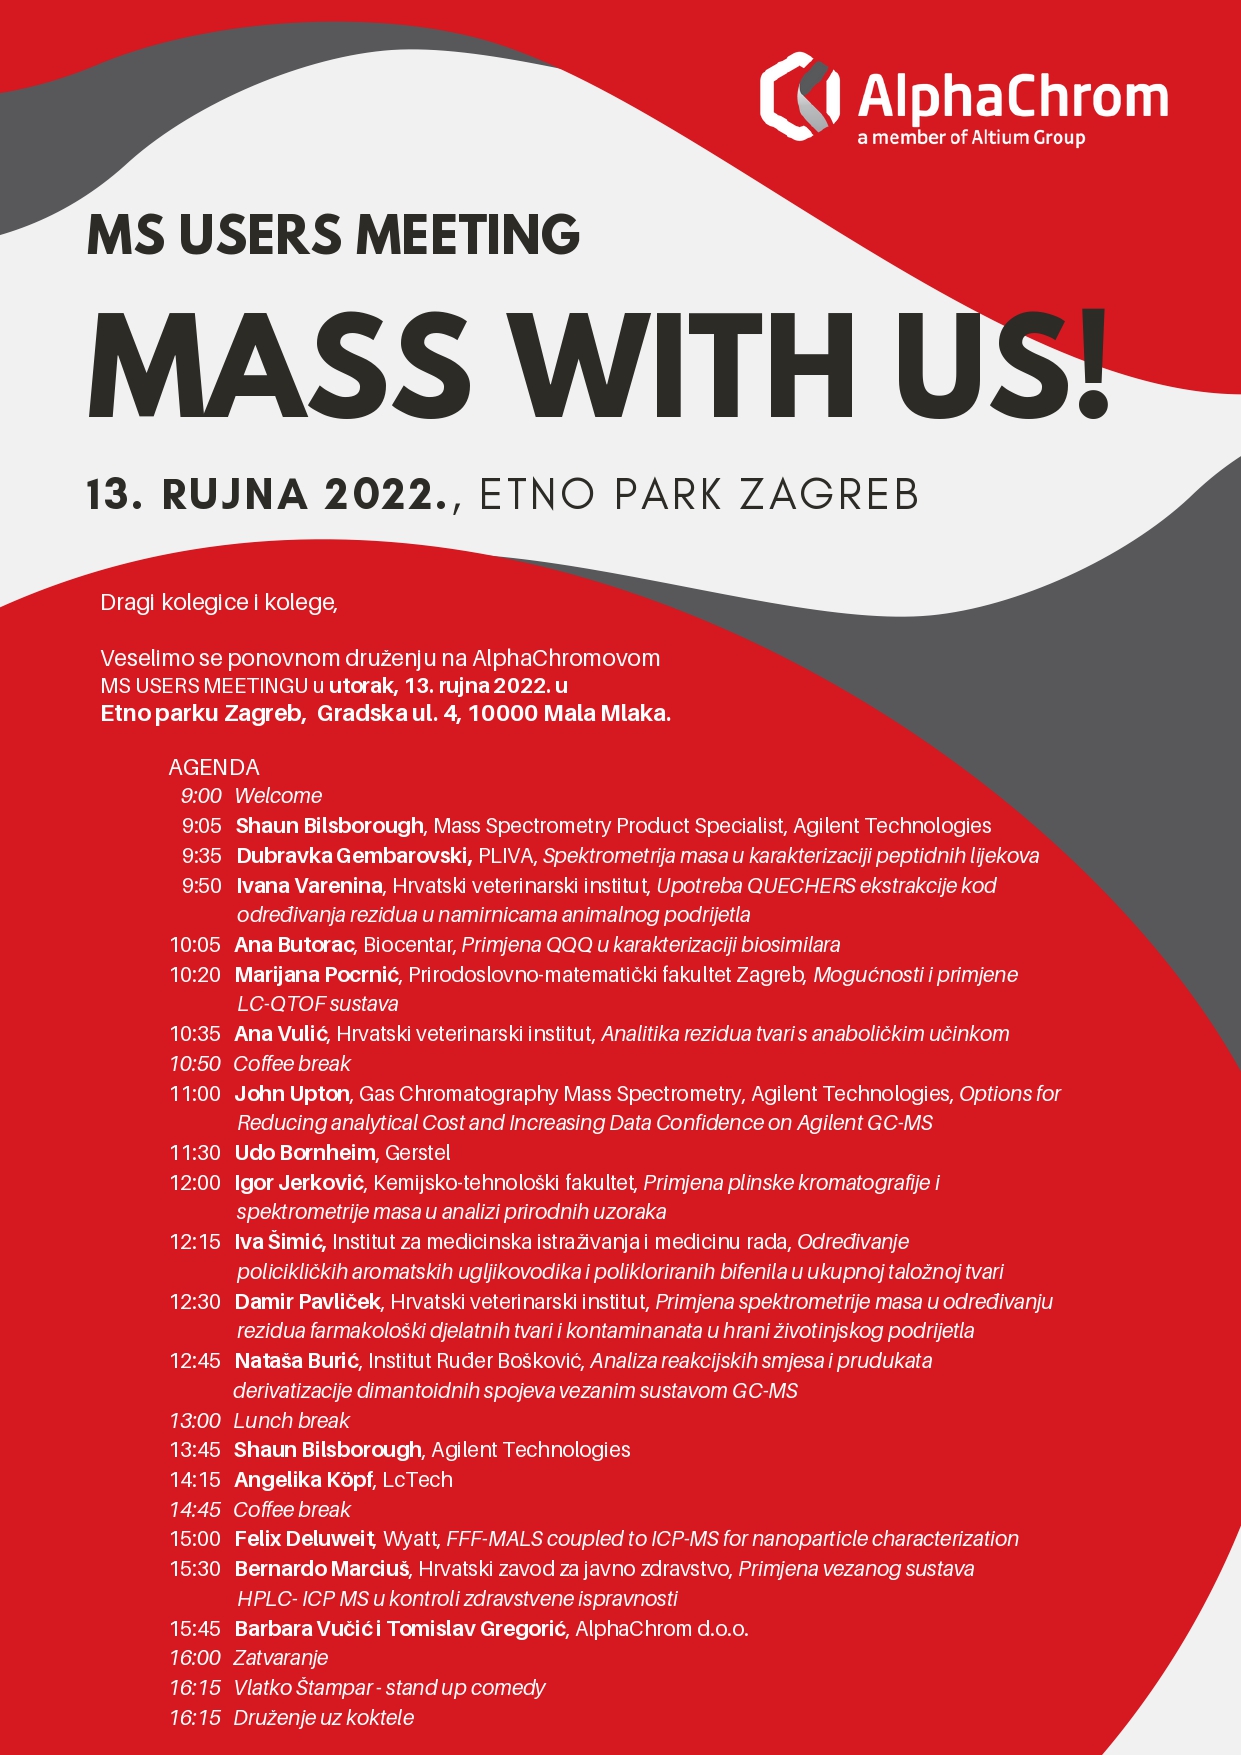 MS users meeting - MASS WITH US!